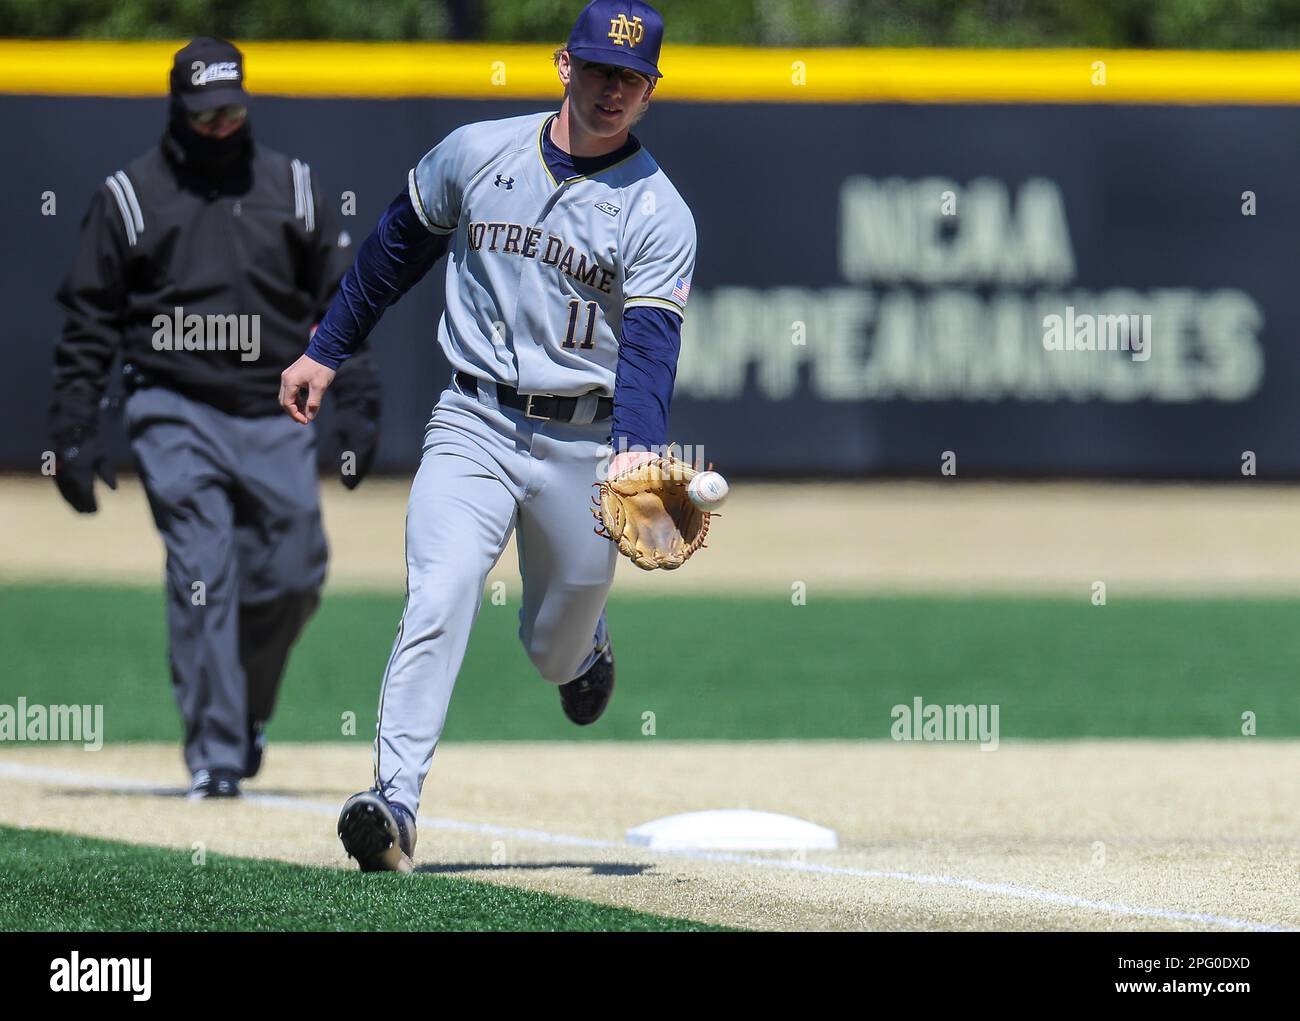 March 19, 2023: Notre Dame sophomore Jack Penney (11) fields ball at 3rd base. Notre Dame won 3-1 against #4 Wake Forest. NCAA baseball game between Notre Dame University and Wake Forest University at David F. Couch Ballpark, Winston Salem. North Carolina.David Beach/CSM Stock Photo